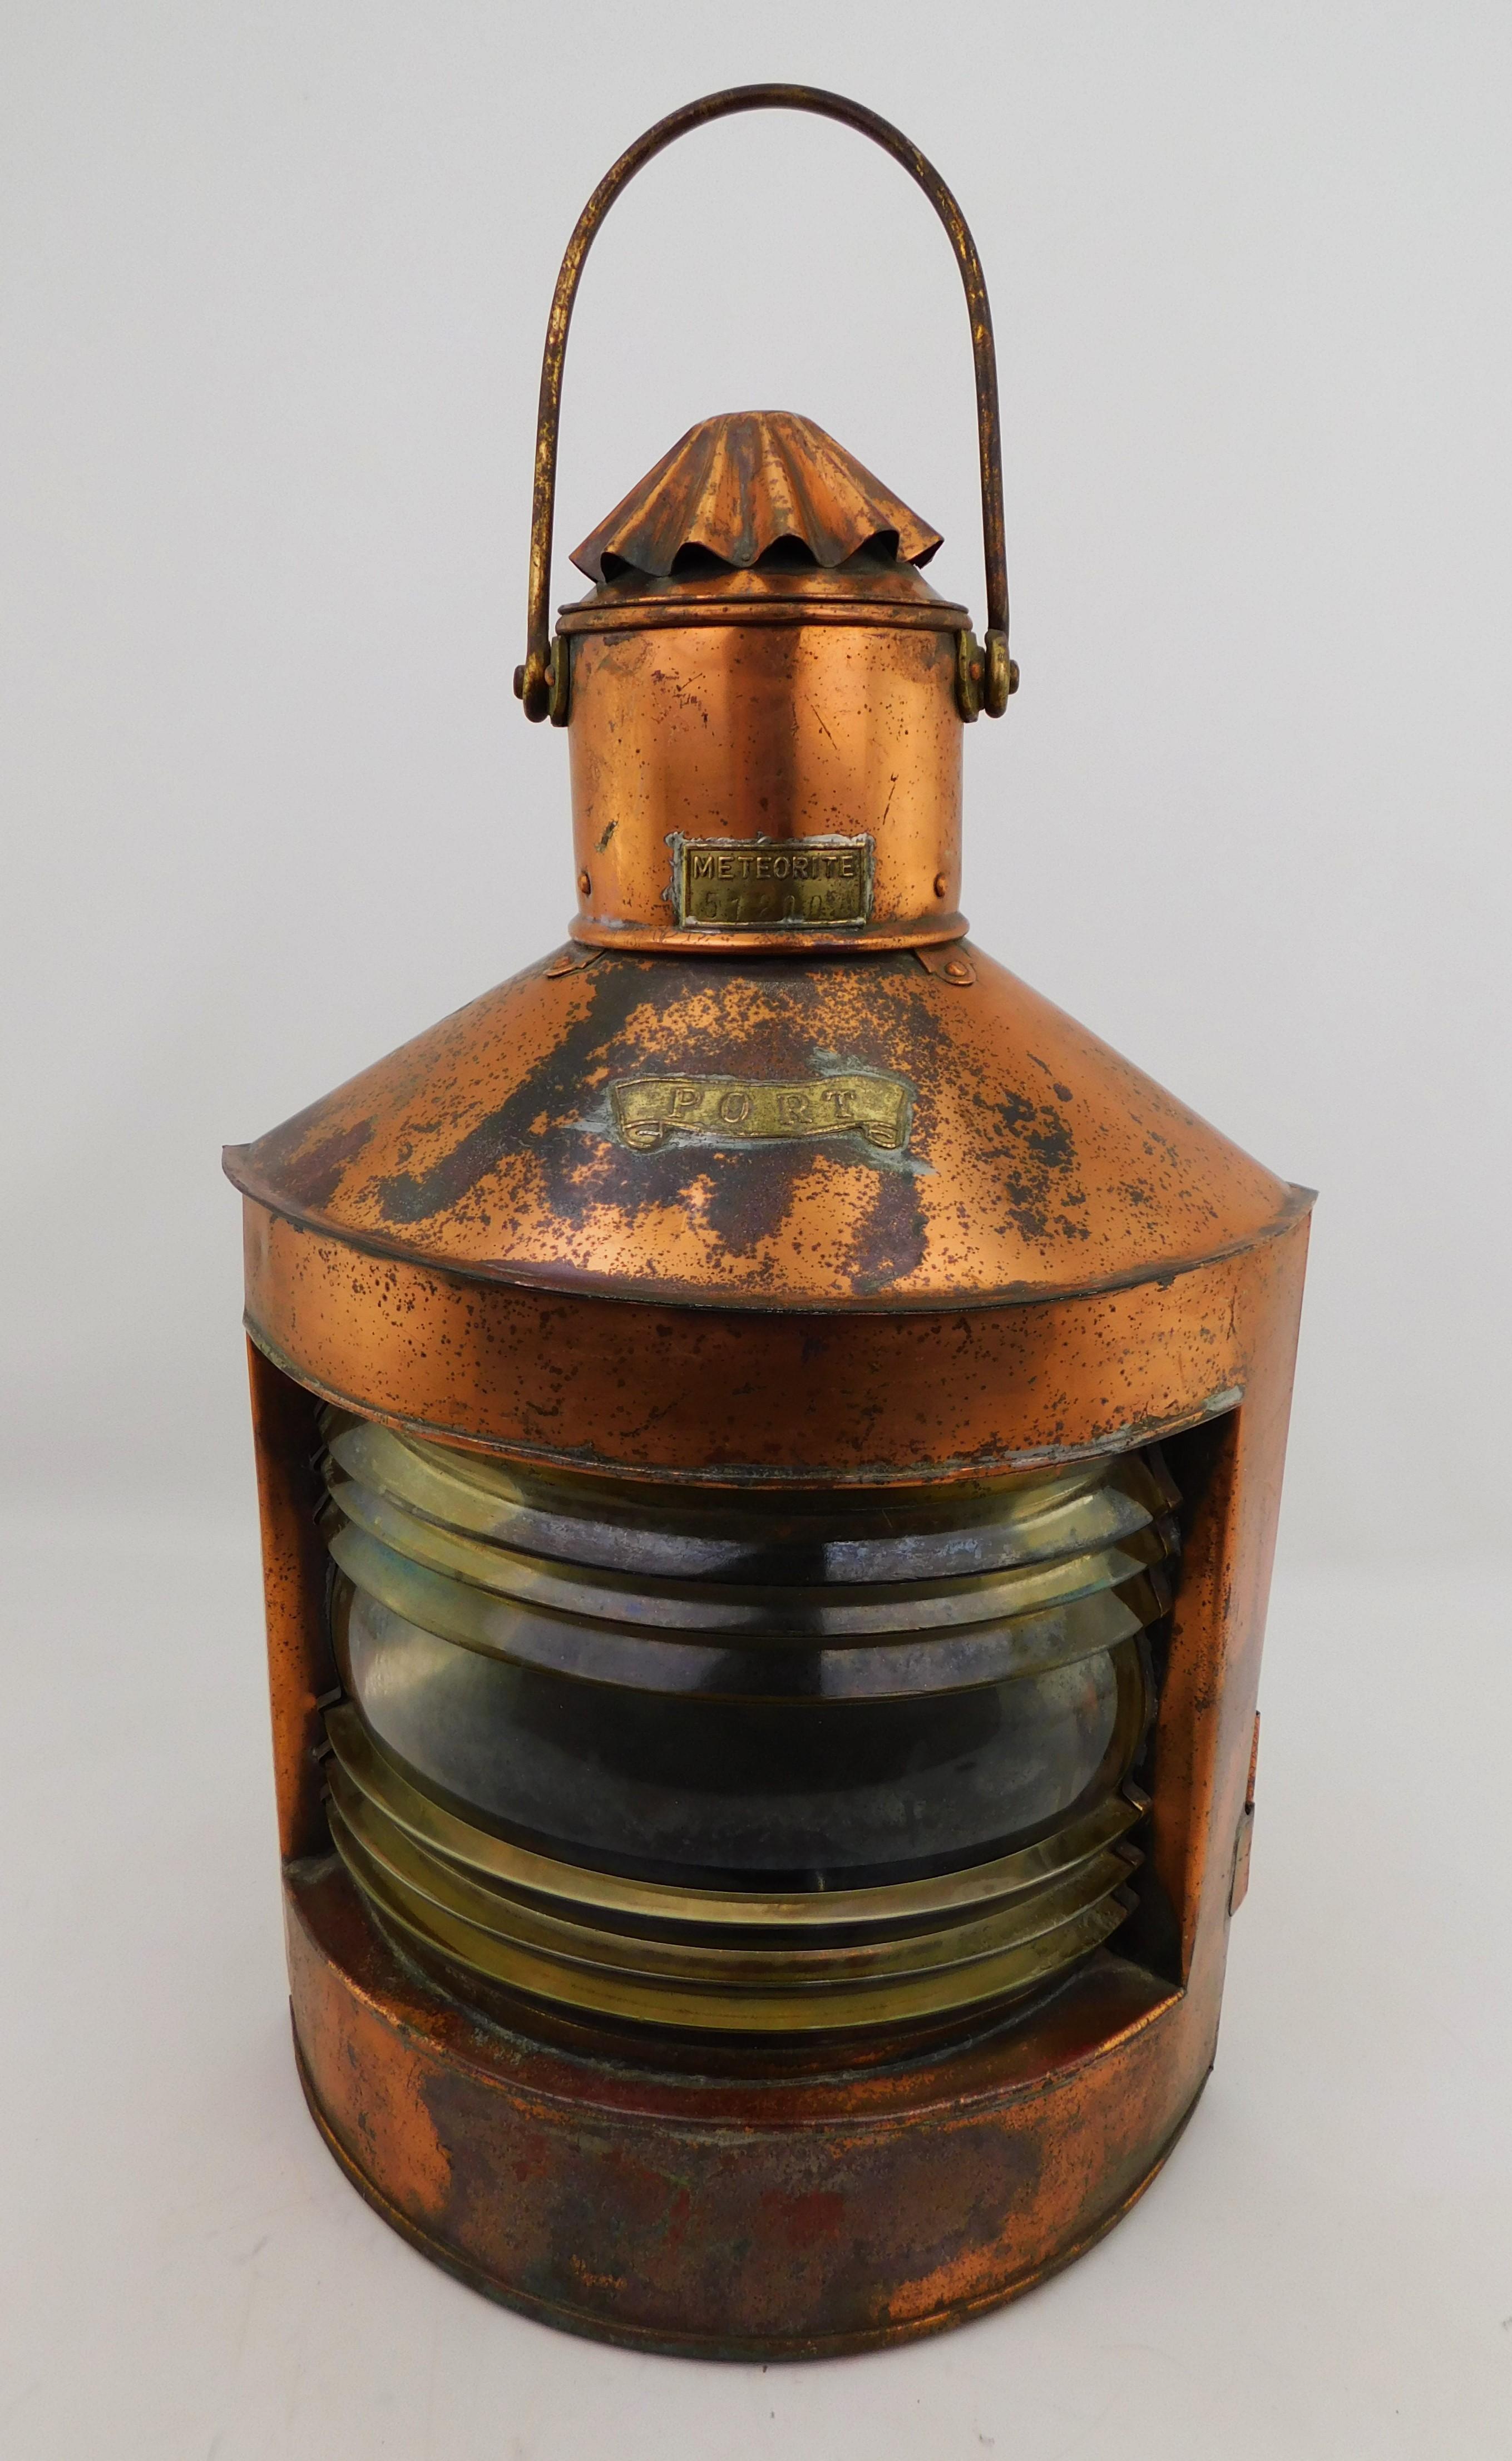 Large early 20th Century Antique British solid copper and brass nautical Port signal lantern/lamp with Fresnel lens. With maker's badge from English firm 